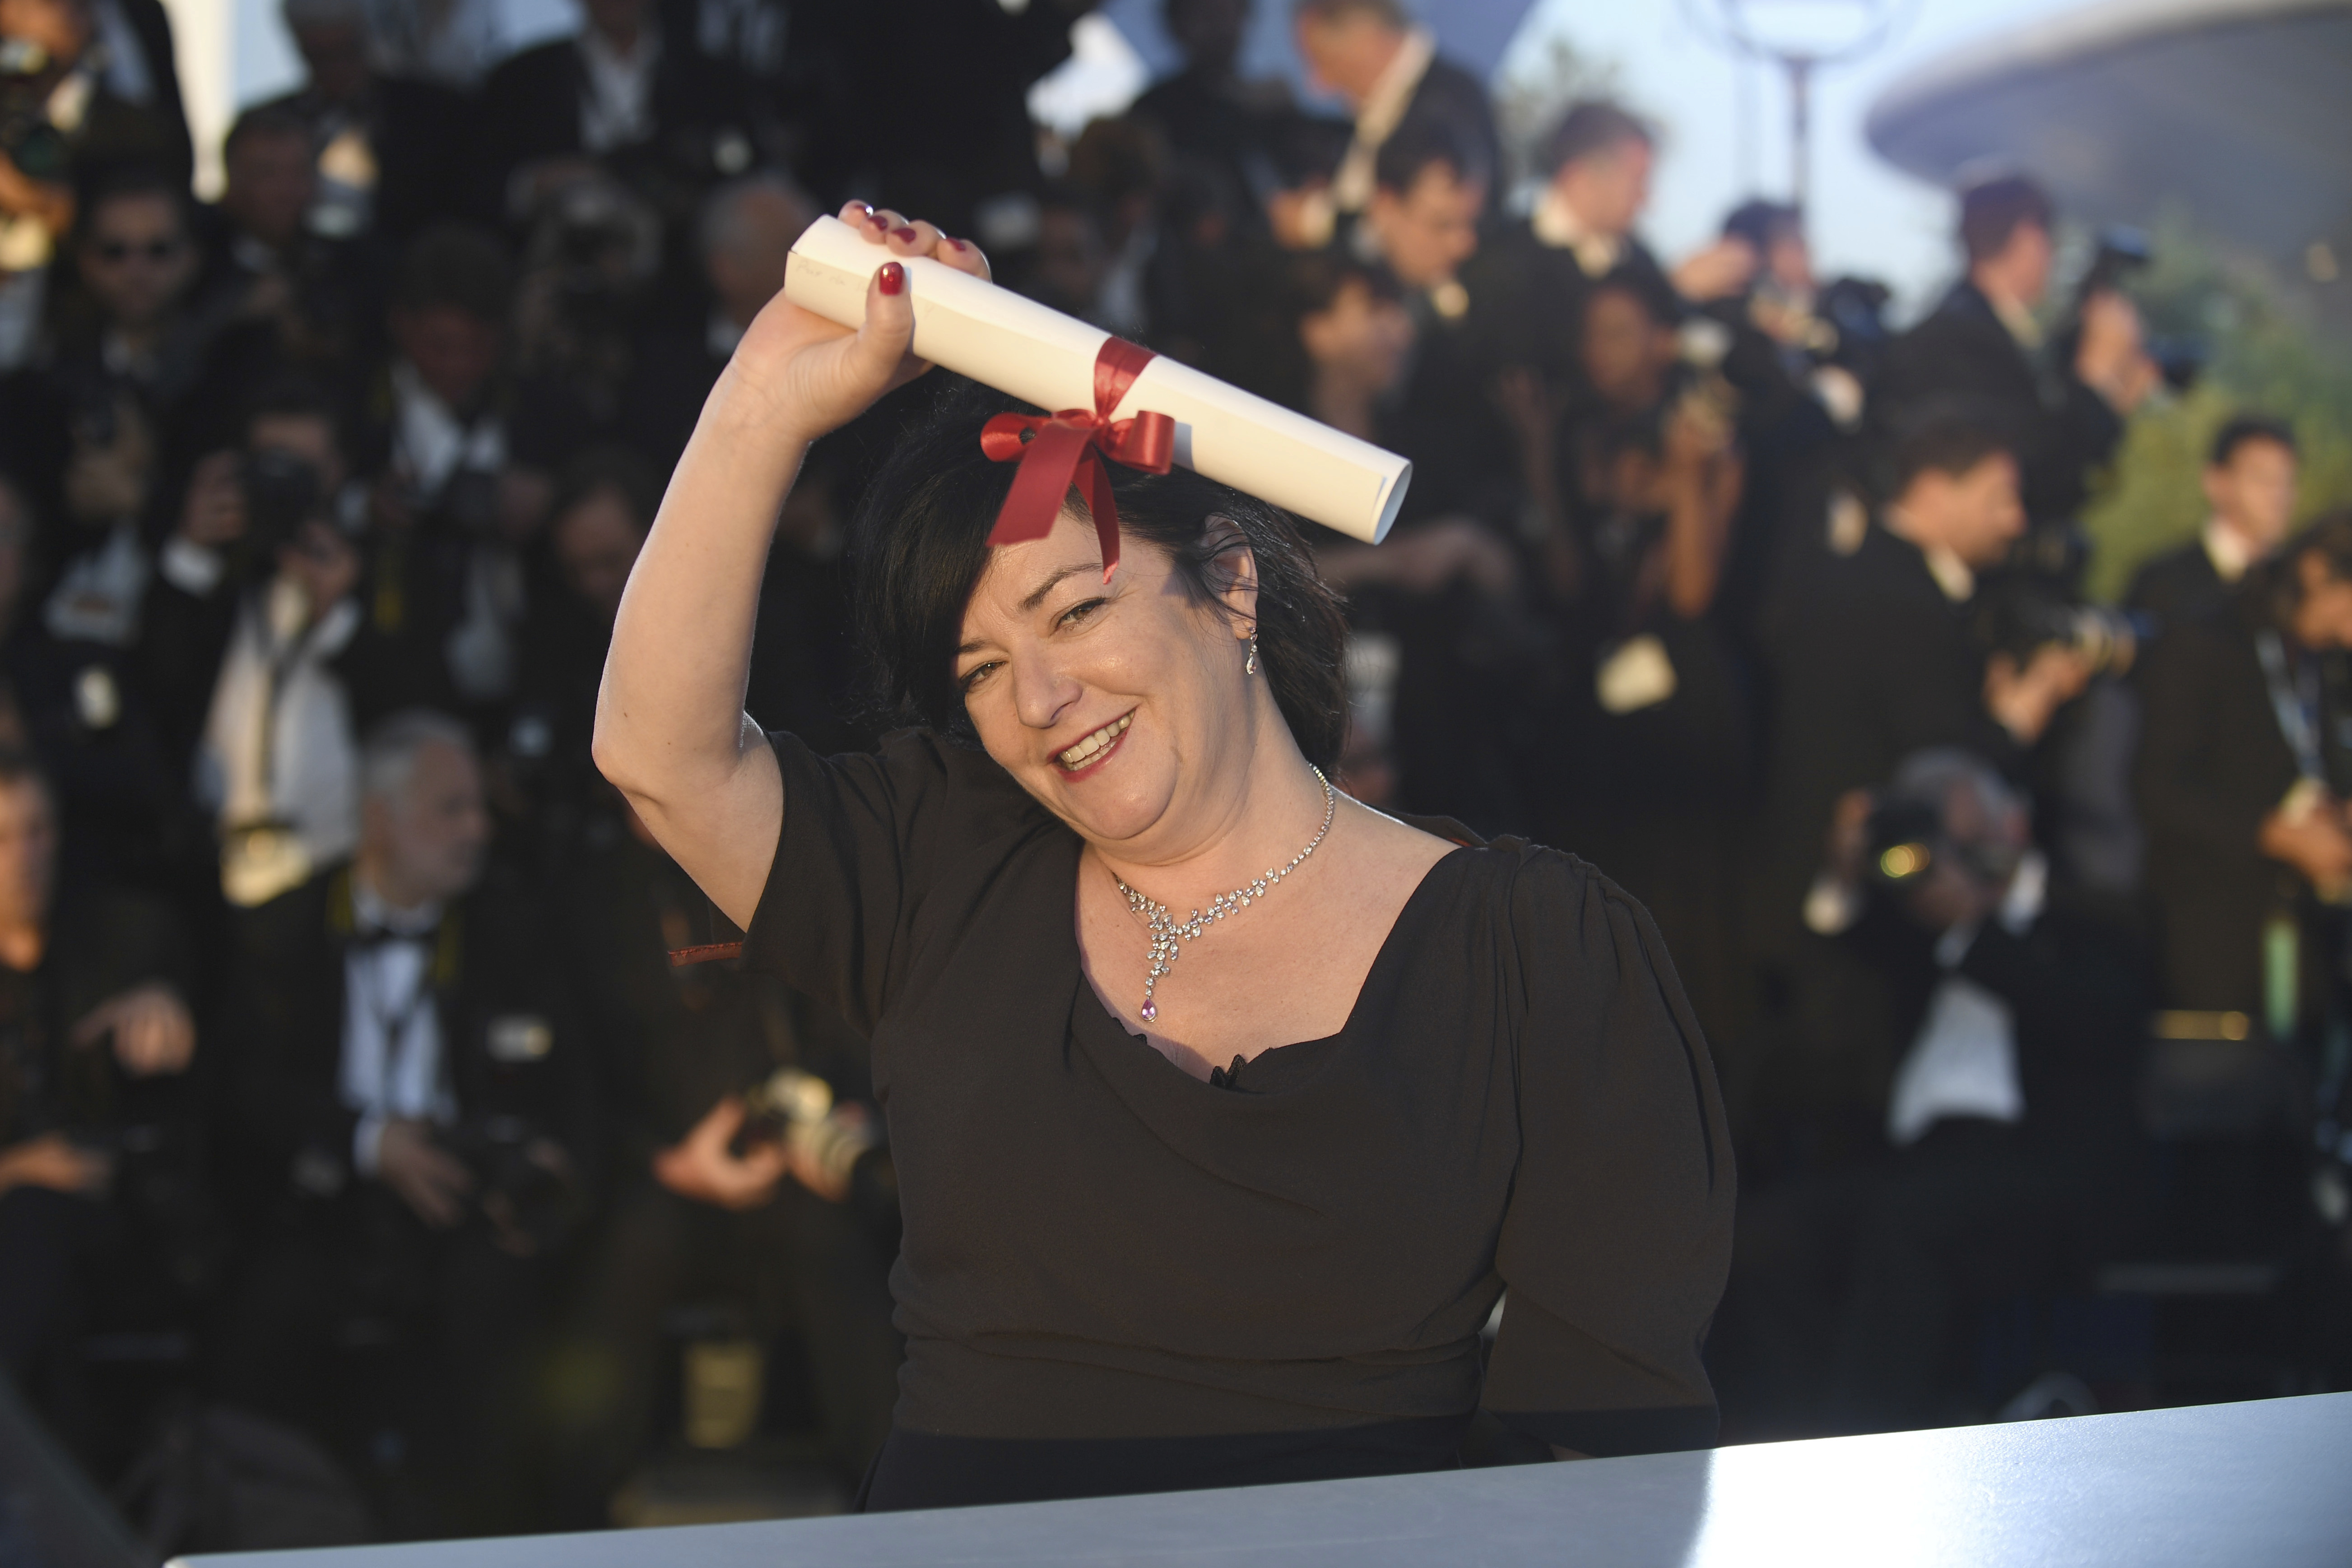 Directors Lynne Ramsay with her joint Best screenplay award for the film You Were Never Really Here poses for photographers during a photo call following the awards ceremony at the 70th international film festival, Cannes, southern France, Sunday, May 28, 2017. (Photo by Arthur Mola/Invision/AP)